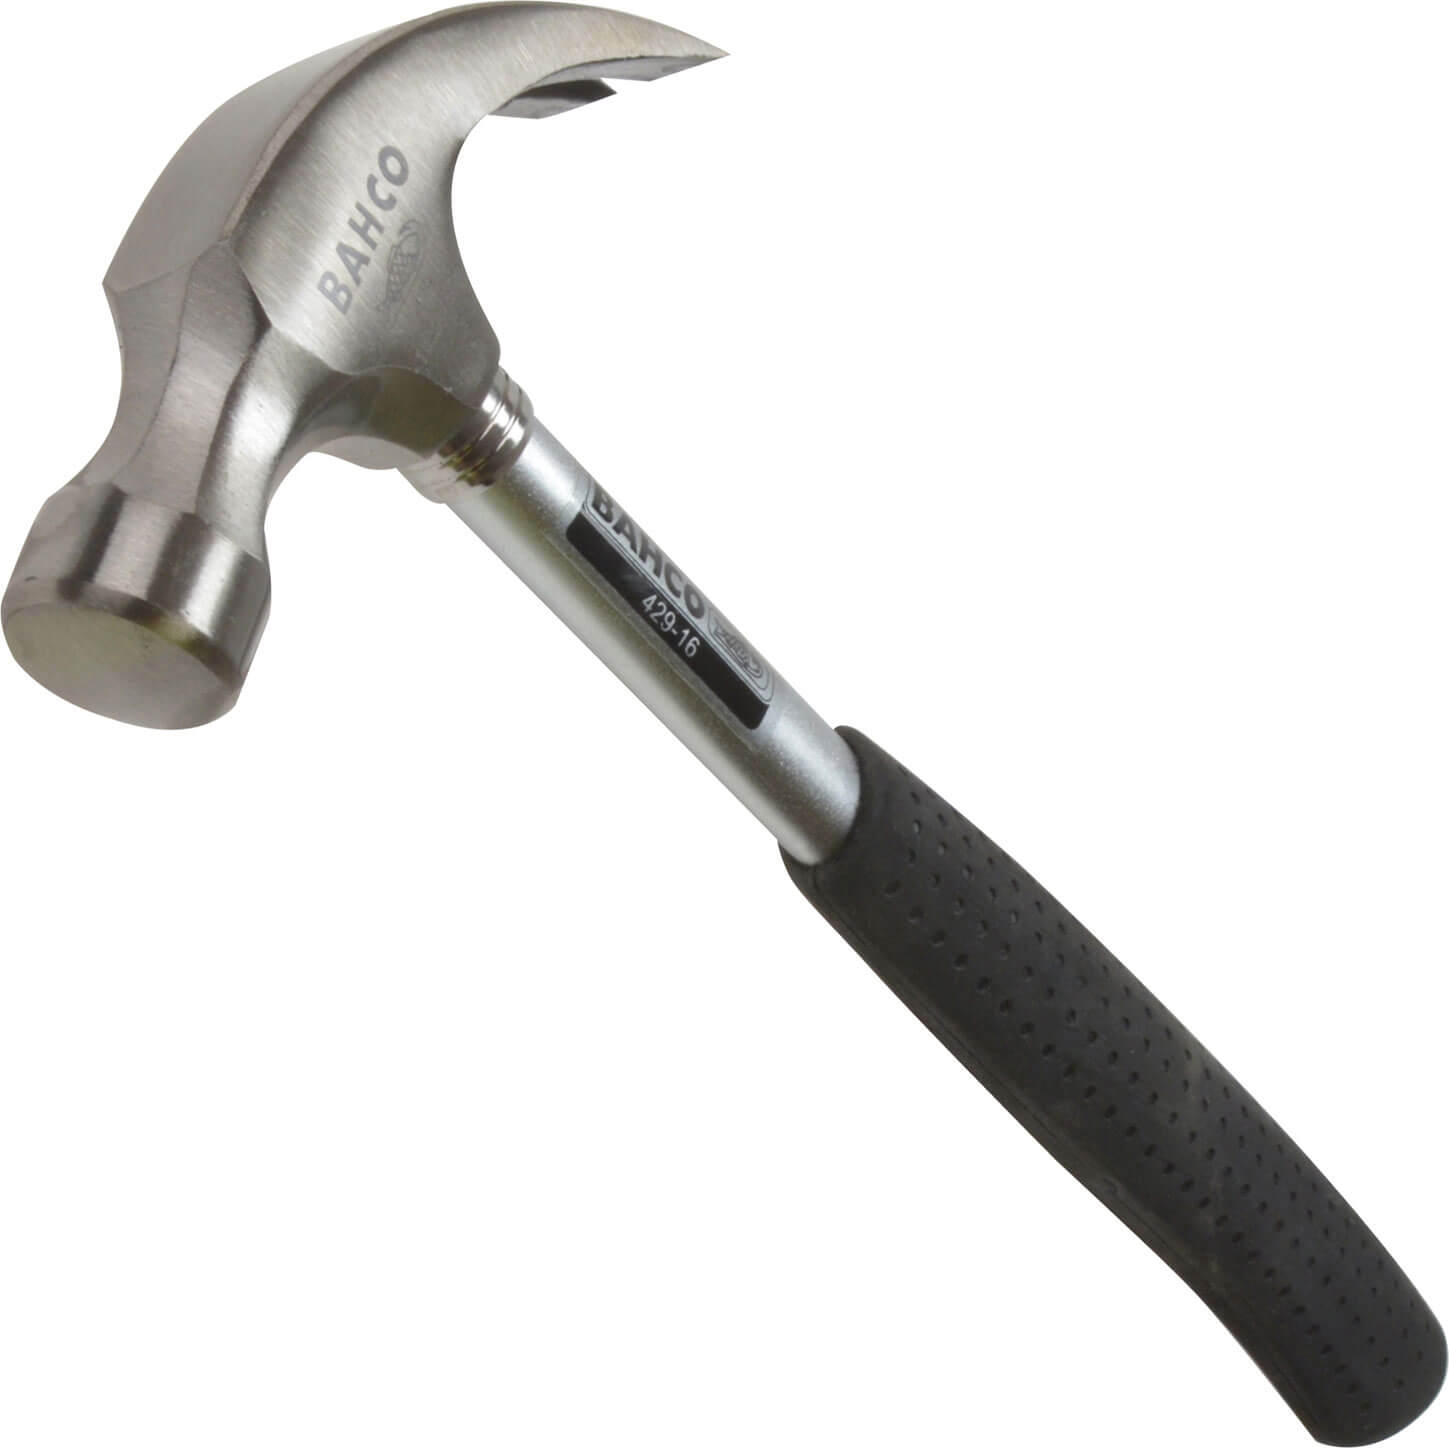 Image of Bahco Claw Hammer Steel Handle 450g